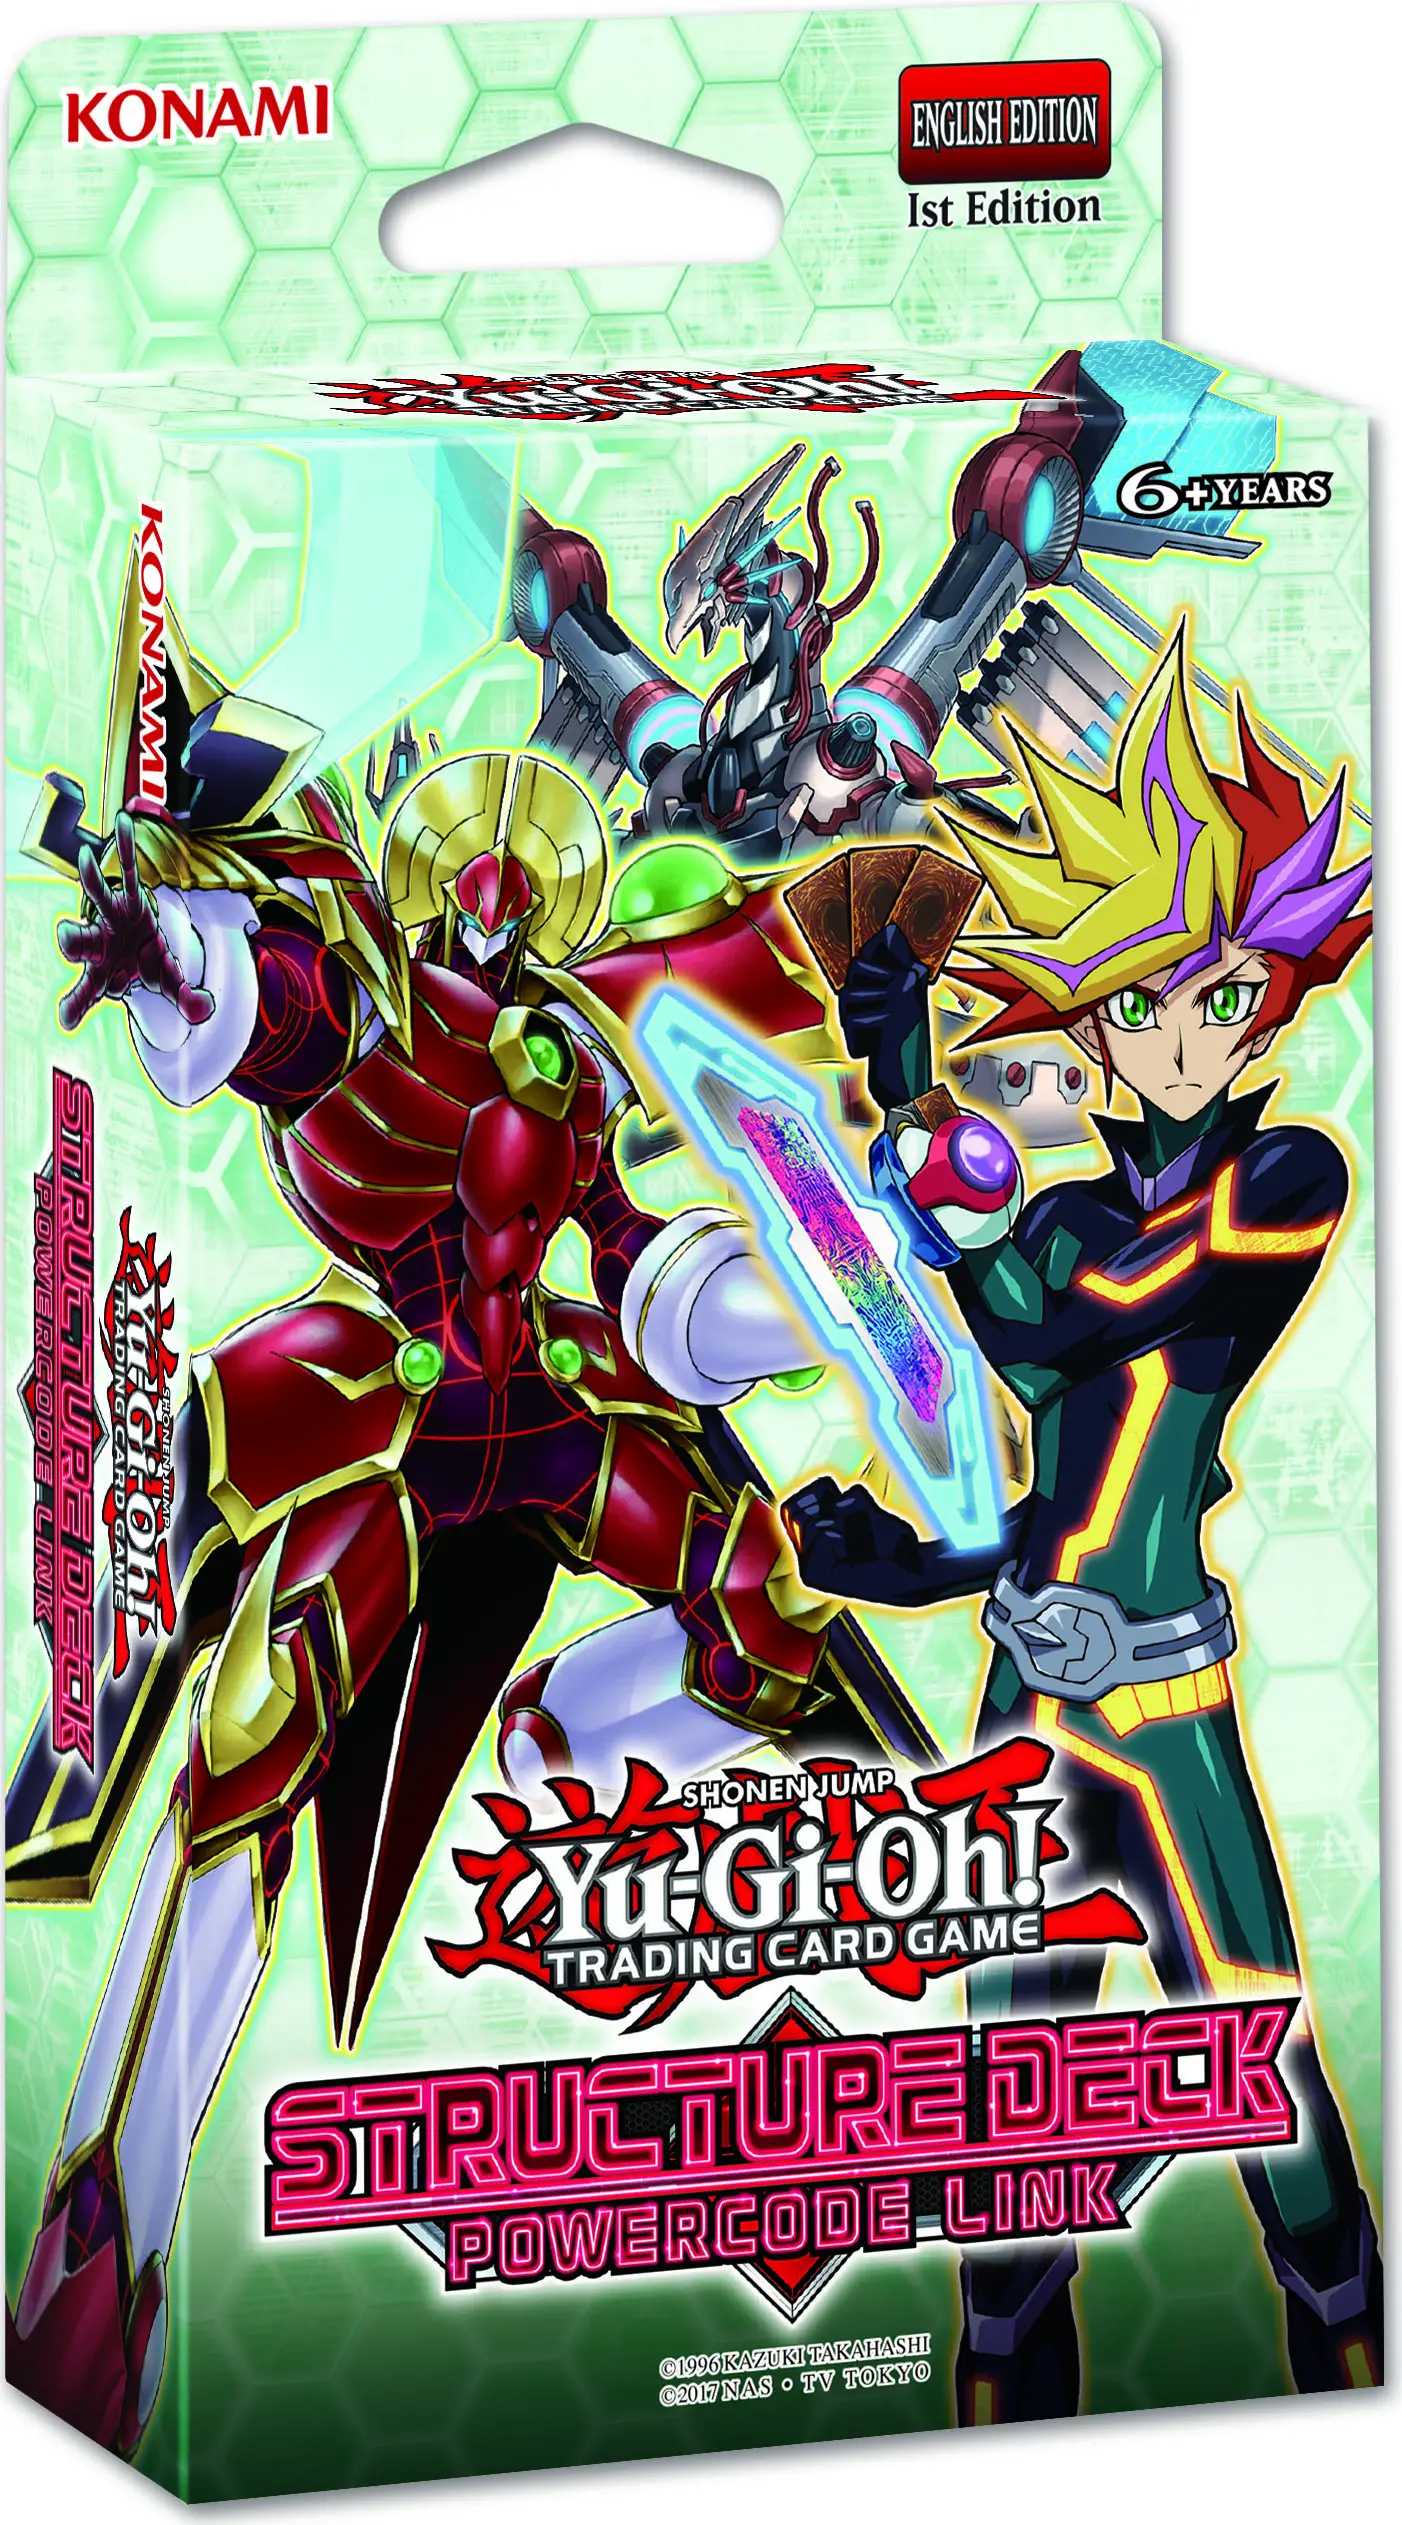 Yu-Gi-Oh! Structure Deck: Powercode Link Announced | YuGiOh! World